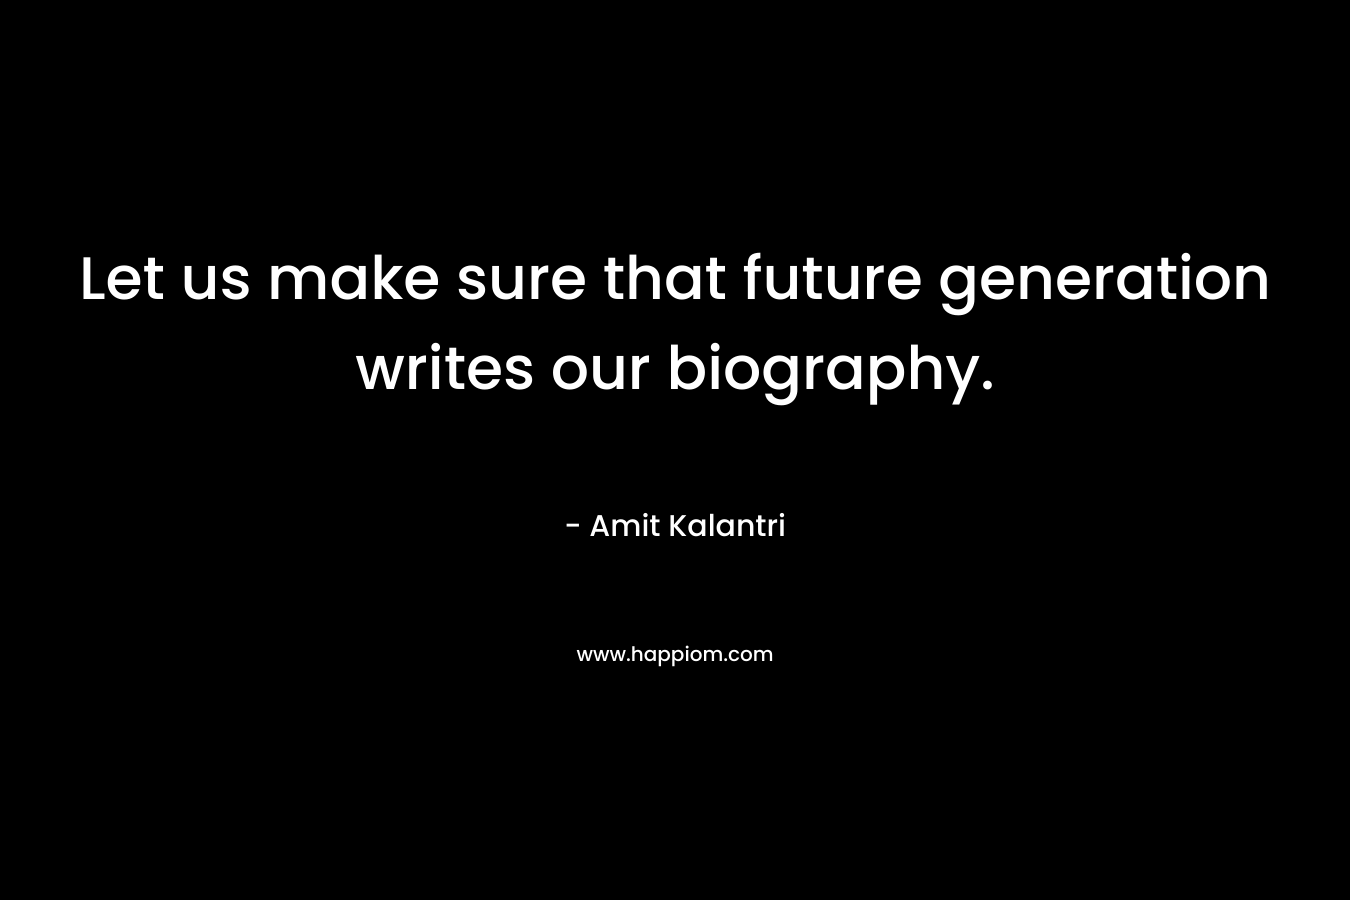 Let us make sure that future generation writes our biography.